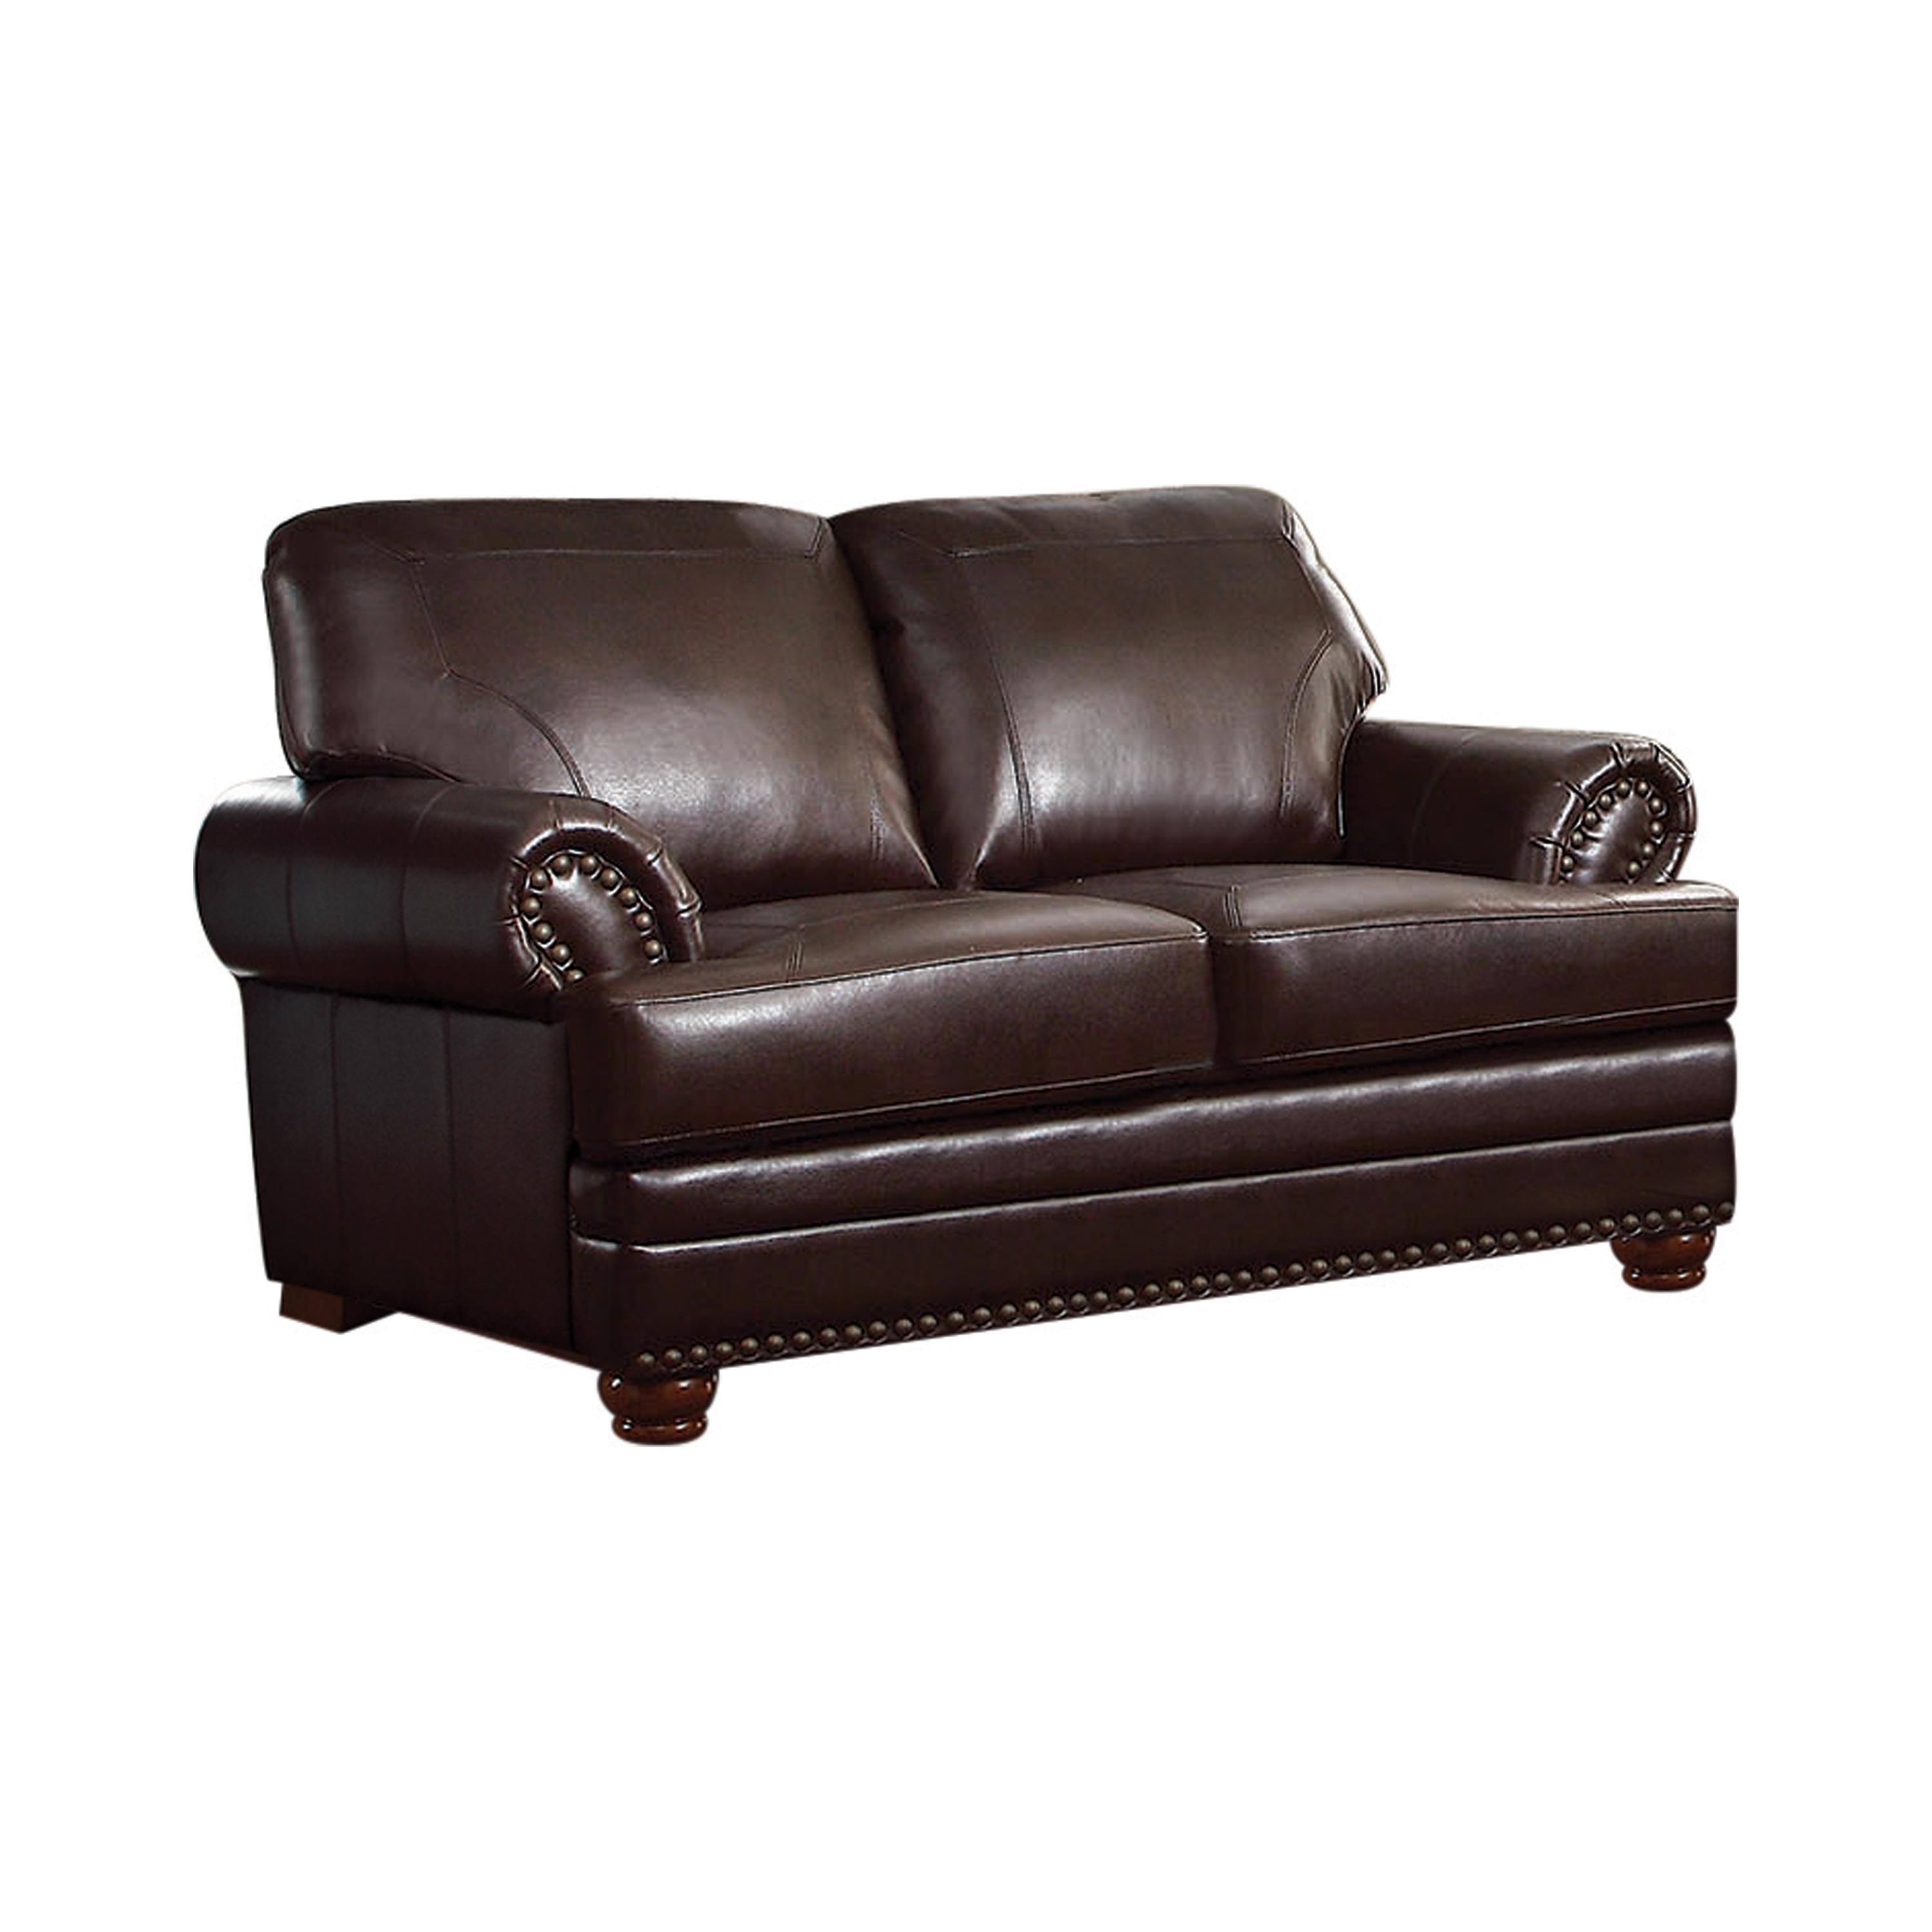 Traditional Loveseat 504412 Colton 504412 in Brown Leatherette